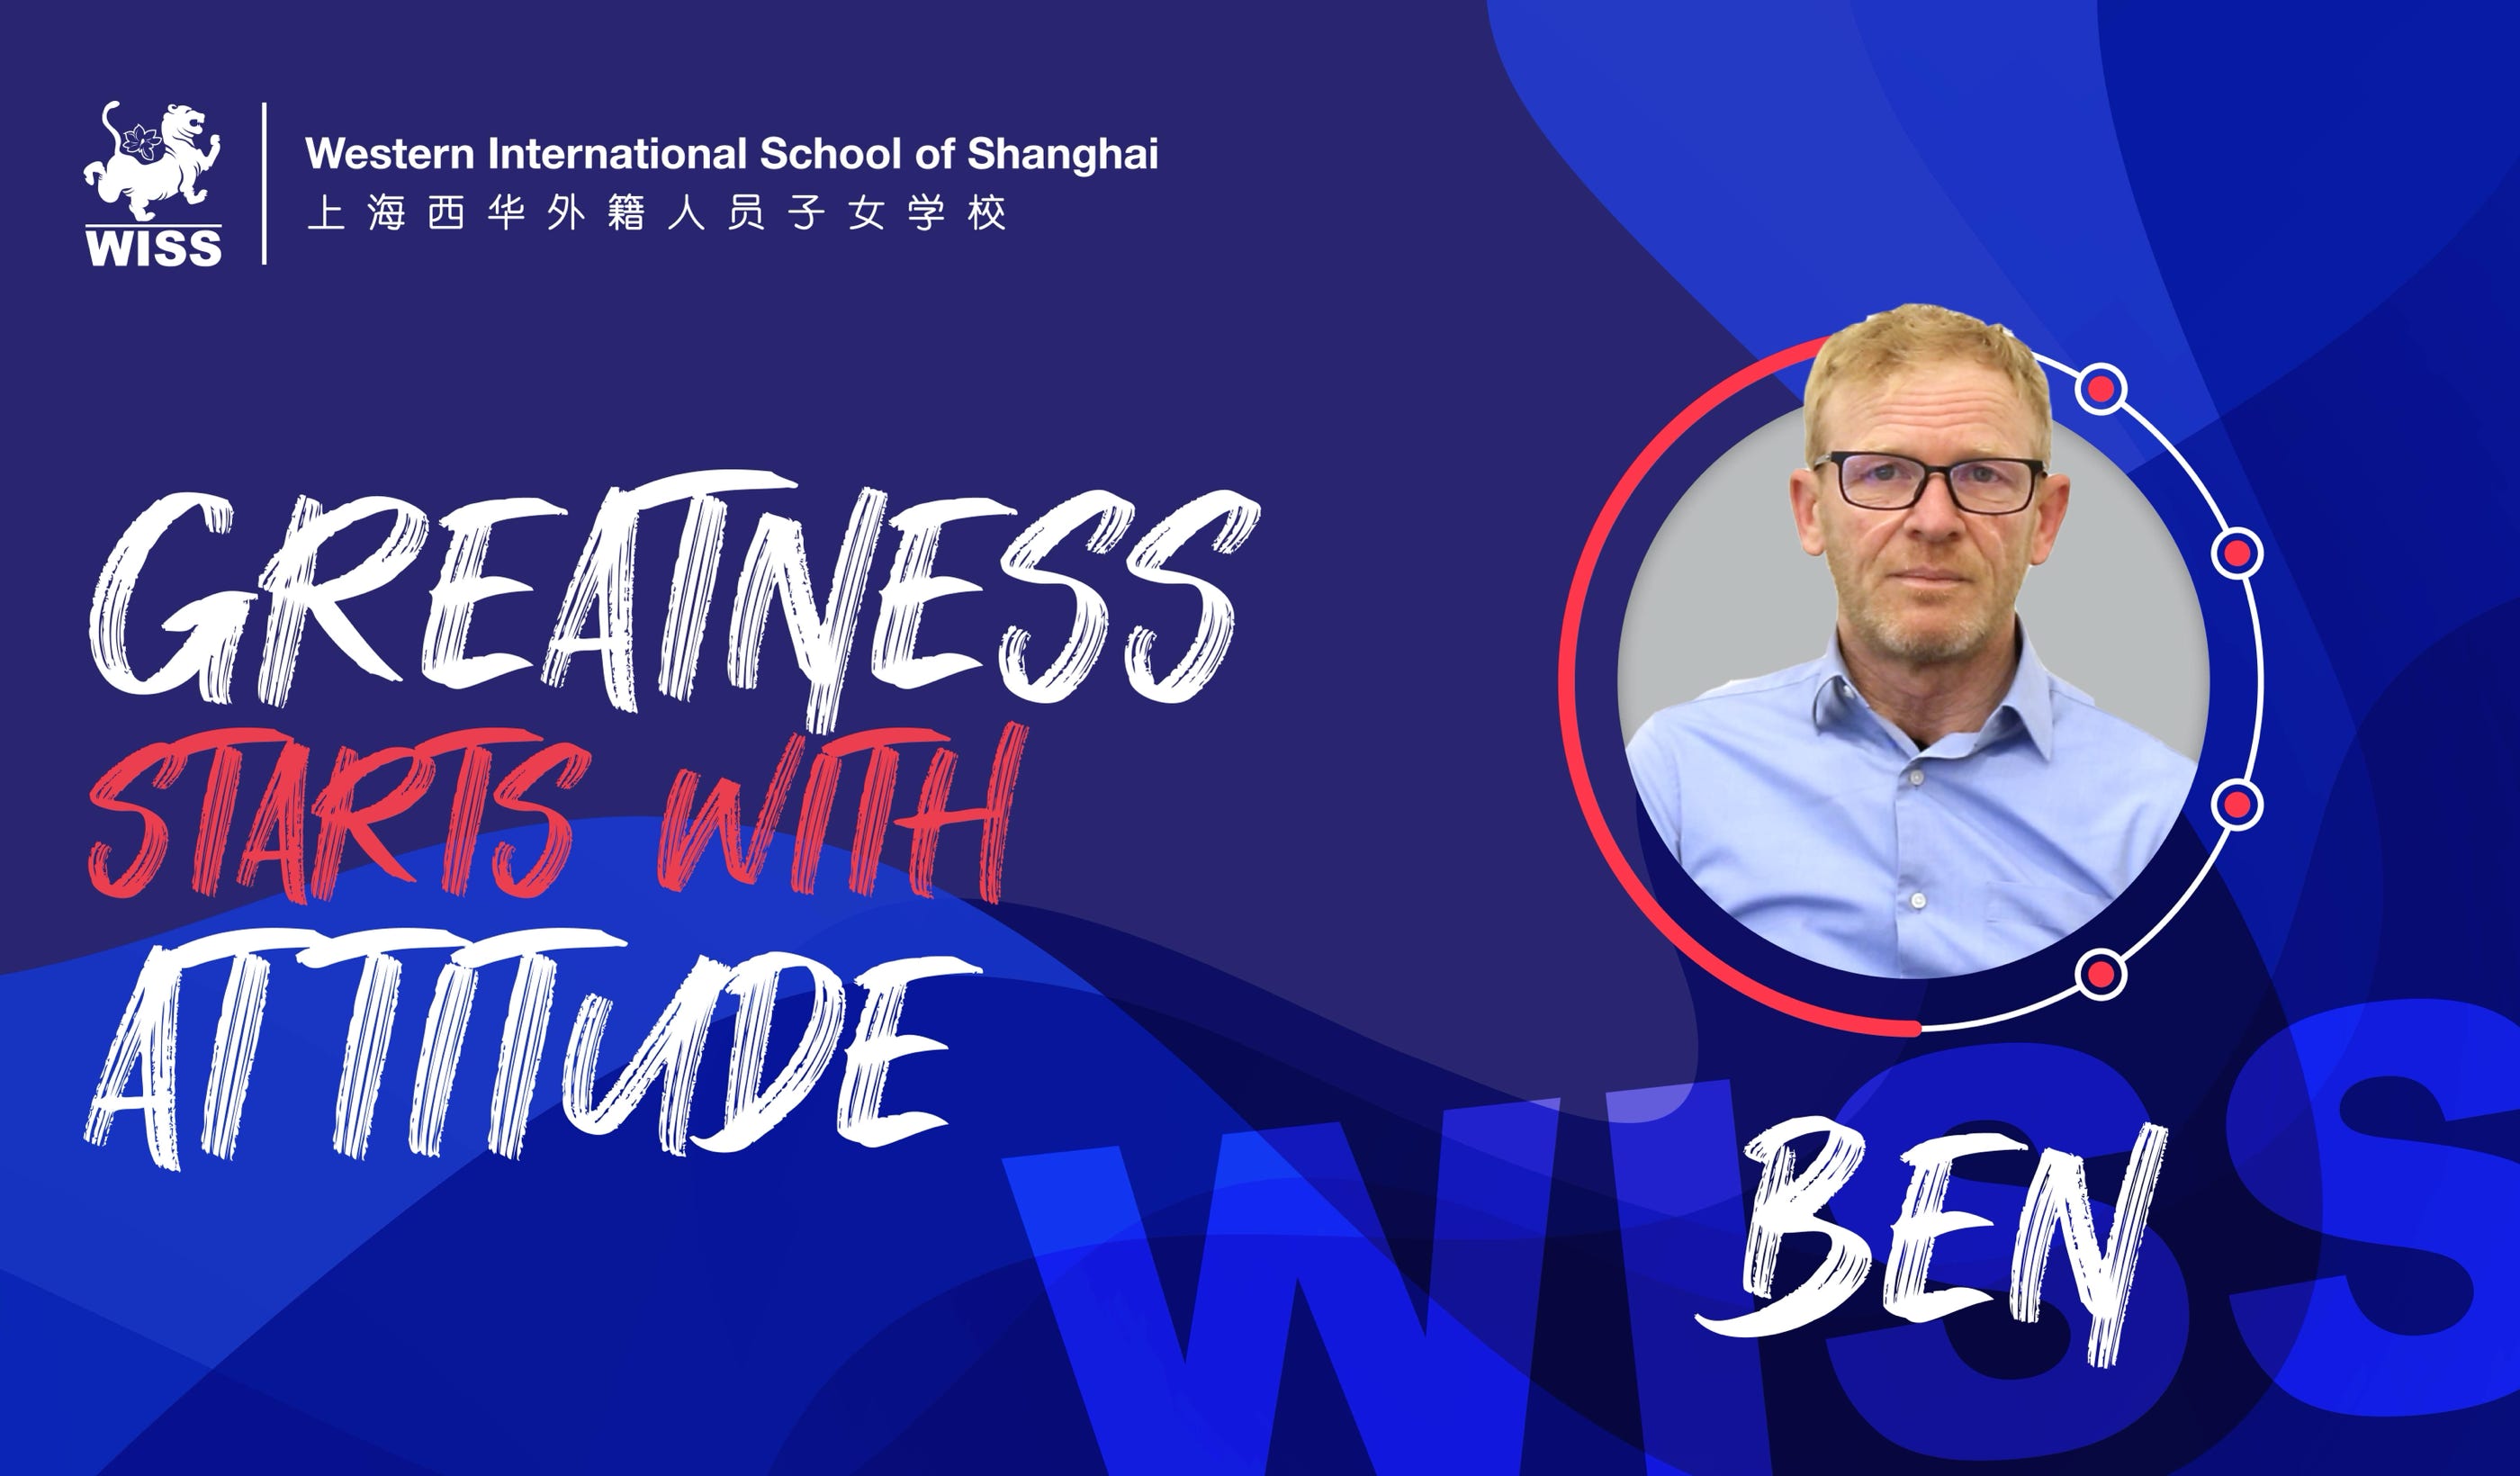 In the latest installment of our series "Greatness Starts With Attitude," we spotlight Ben Ness, a remarkable teacher at the Western International School of Shanghai whose journey epitomizes the power of resilience, passion, and determination. Hailing from London, United Kingdom, Ben's path to greatness took root at the Western International School of Shanghai (WISS), where he discovered his true calling and inspired countless others along the way.  Ben's story is one of transformation and self-discovery, shaped by his attitude towards life's challenges. His journey began at the tender age of 17 when he embarked on a voyage working for his father's international logistics and transport company. Sent on assignments across Europe and near Asia, Ben's initial exposure to the world ignited a passion for photography that would later become his driving force.